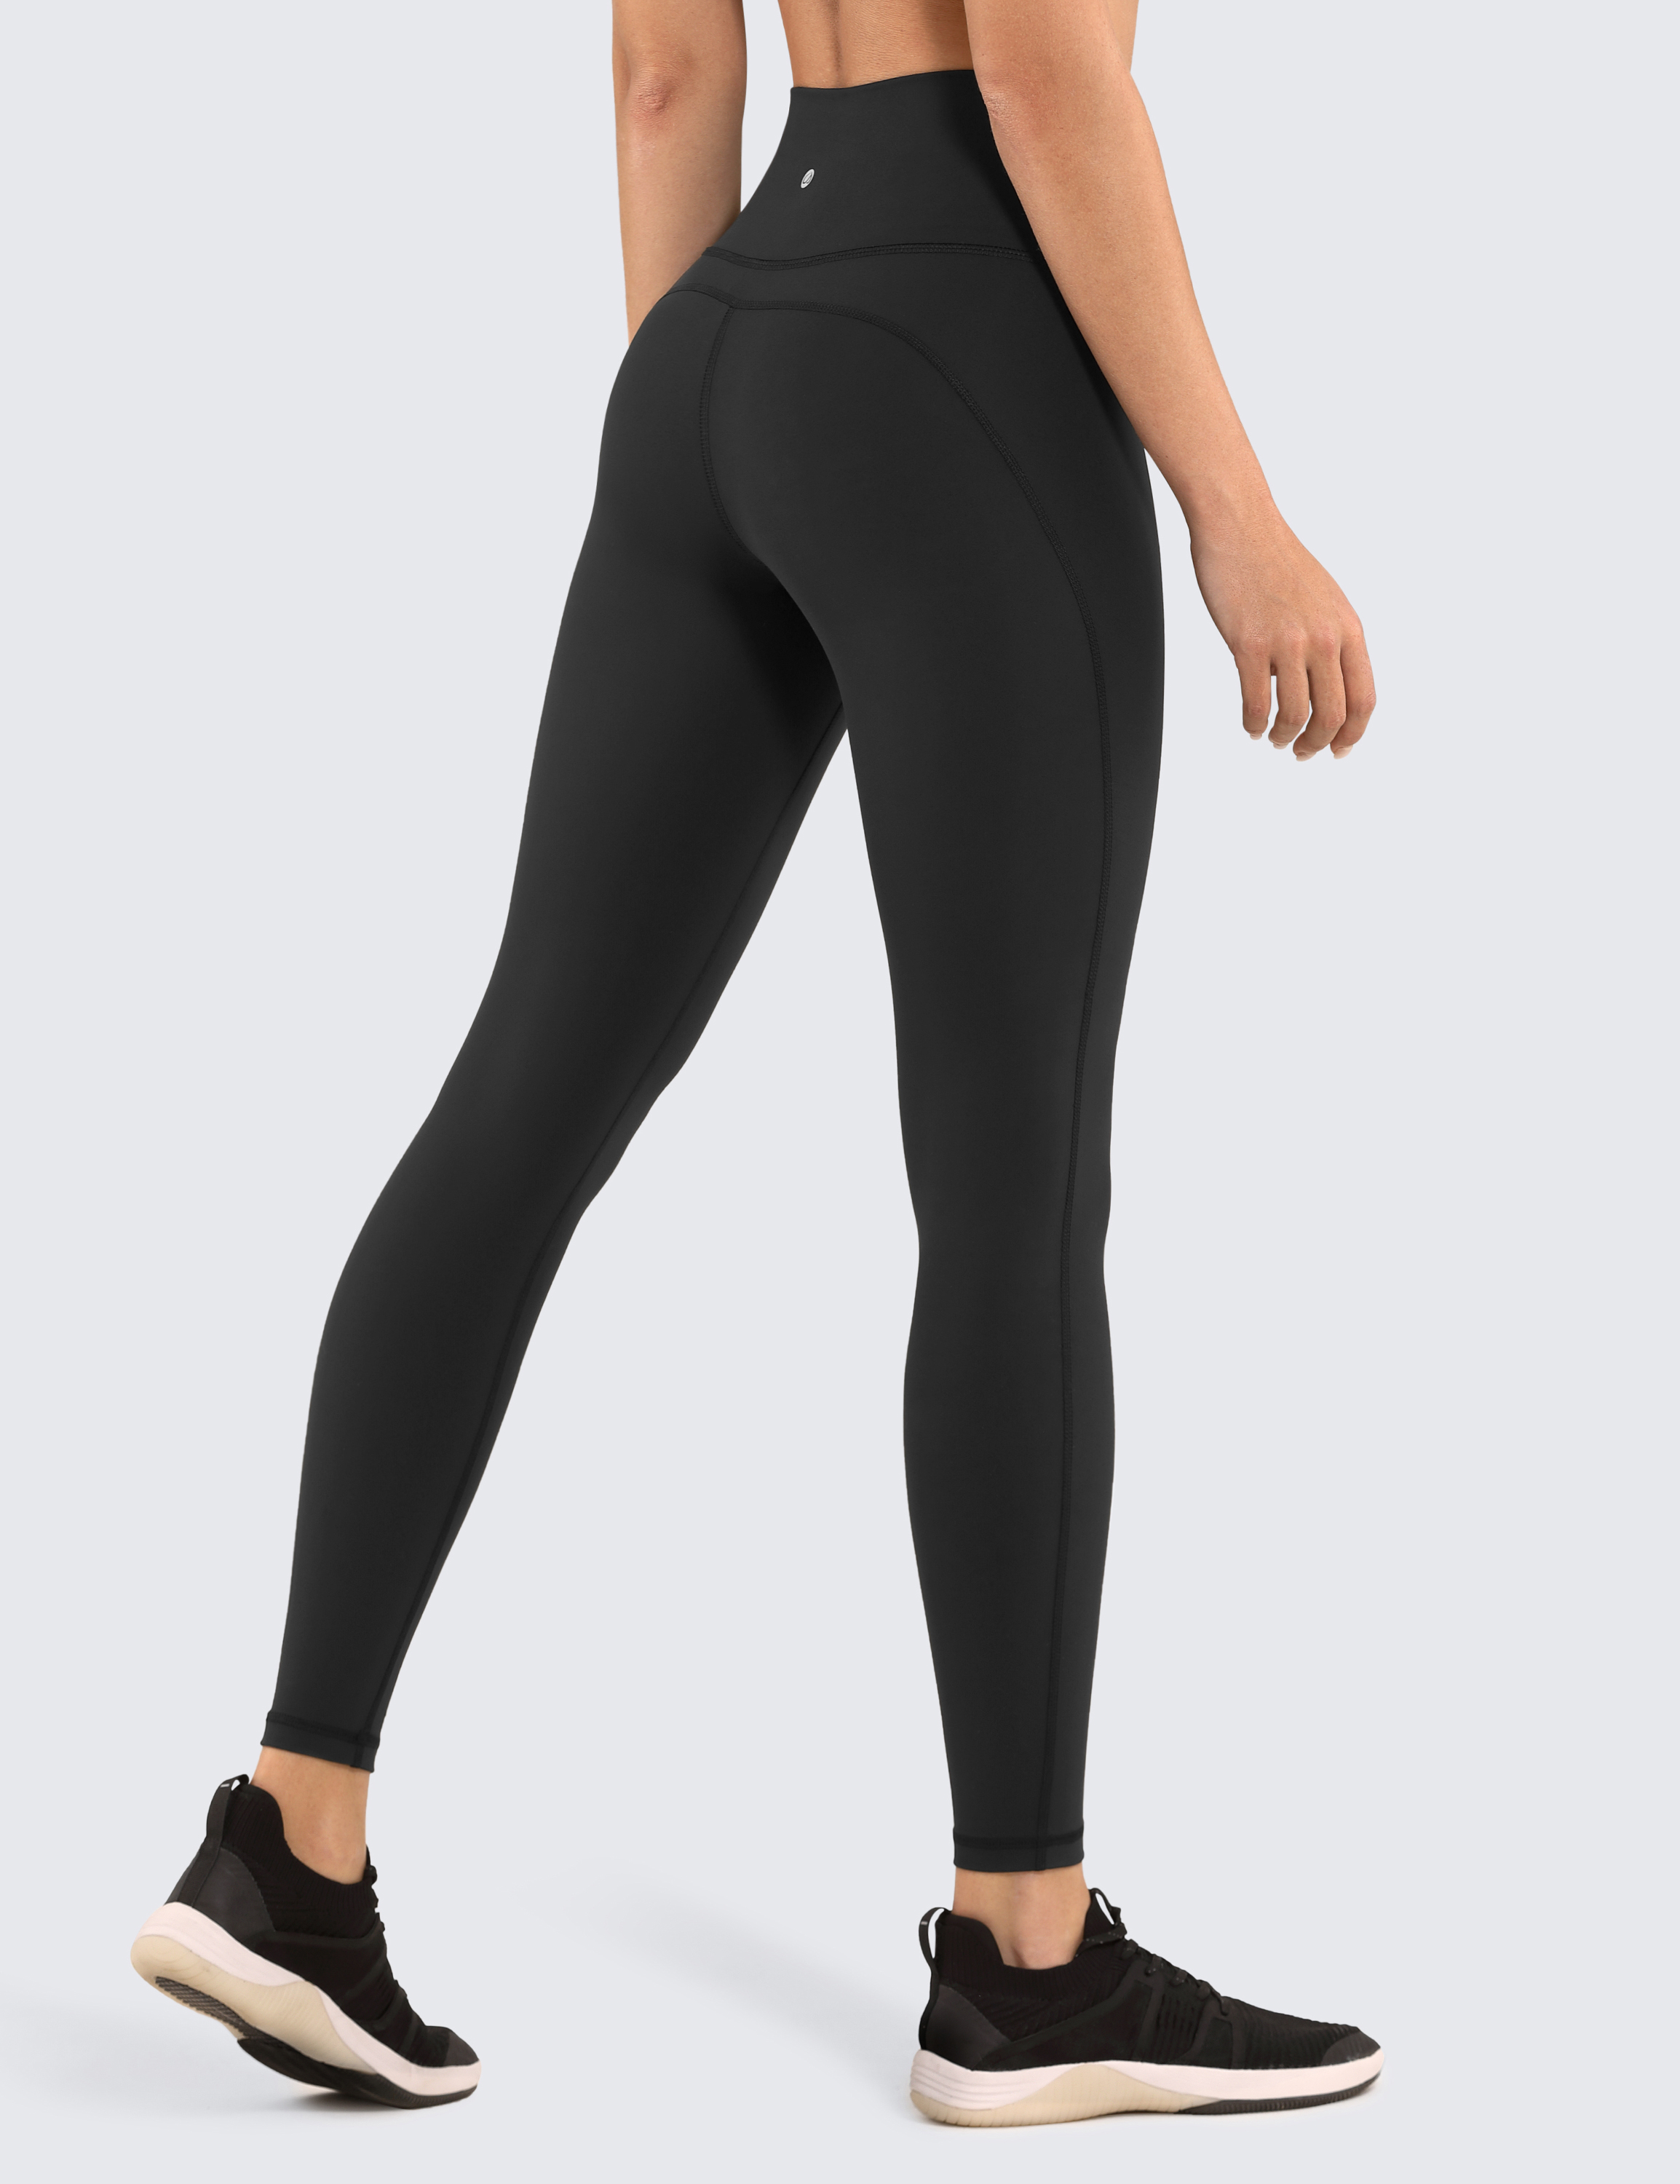 Buy CRZ YOGA Women's Ulti-Dry Workout Leggings 25 Inches - High